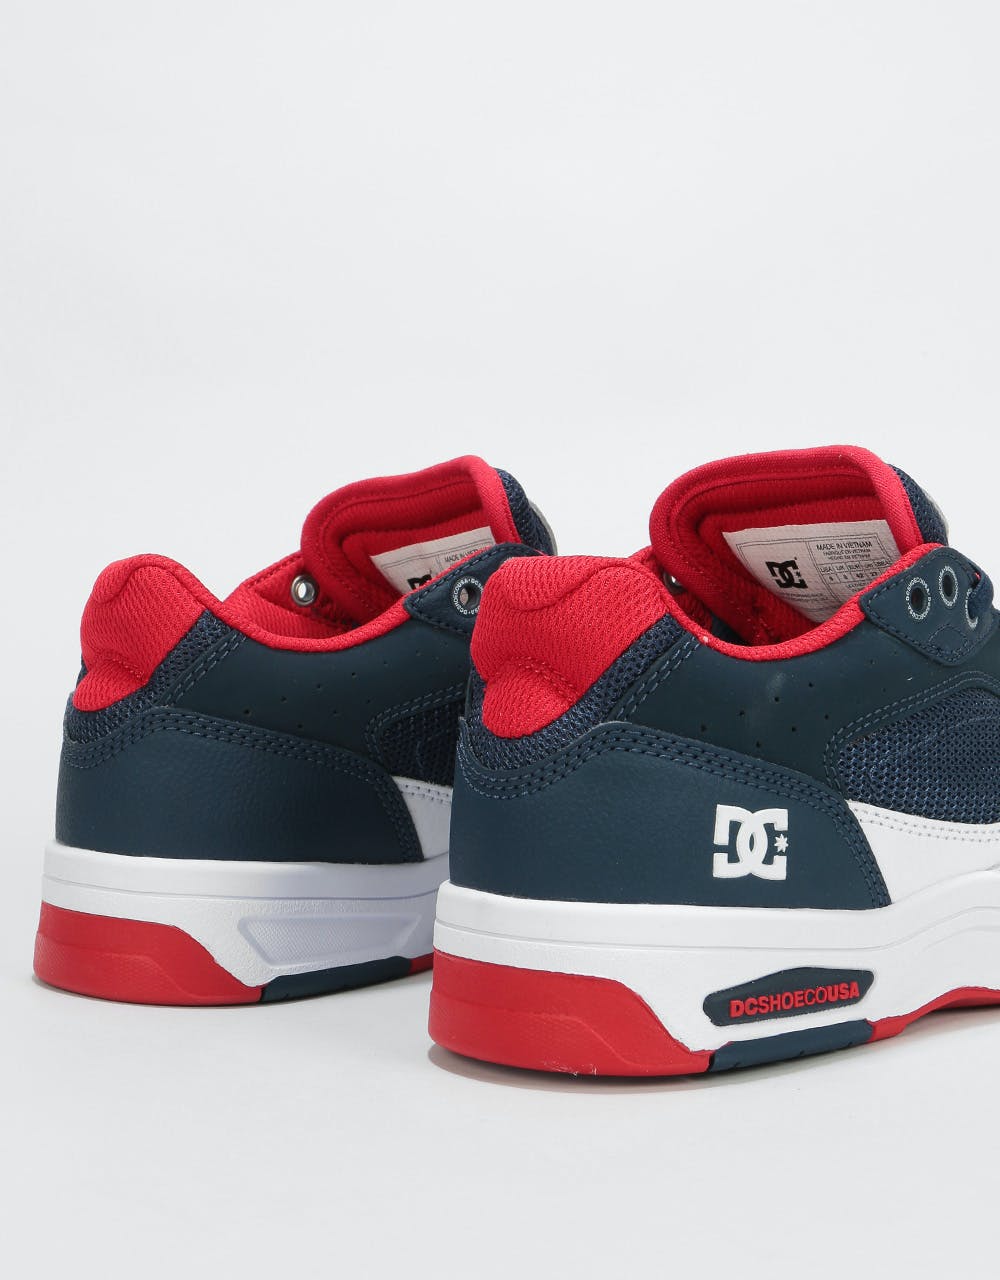 DC Maswell Skate Shoes - Navy/White